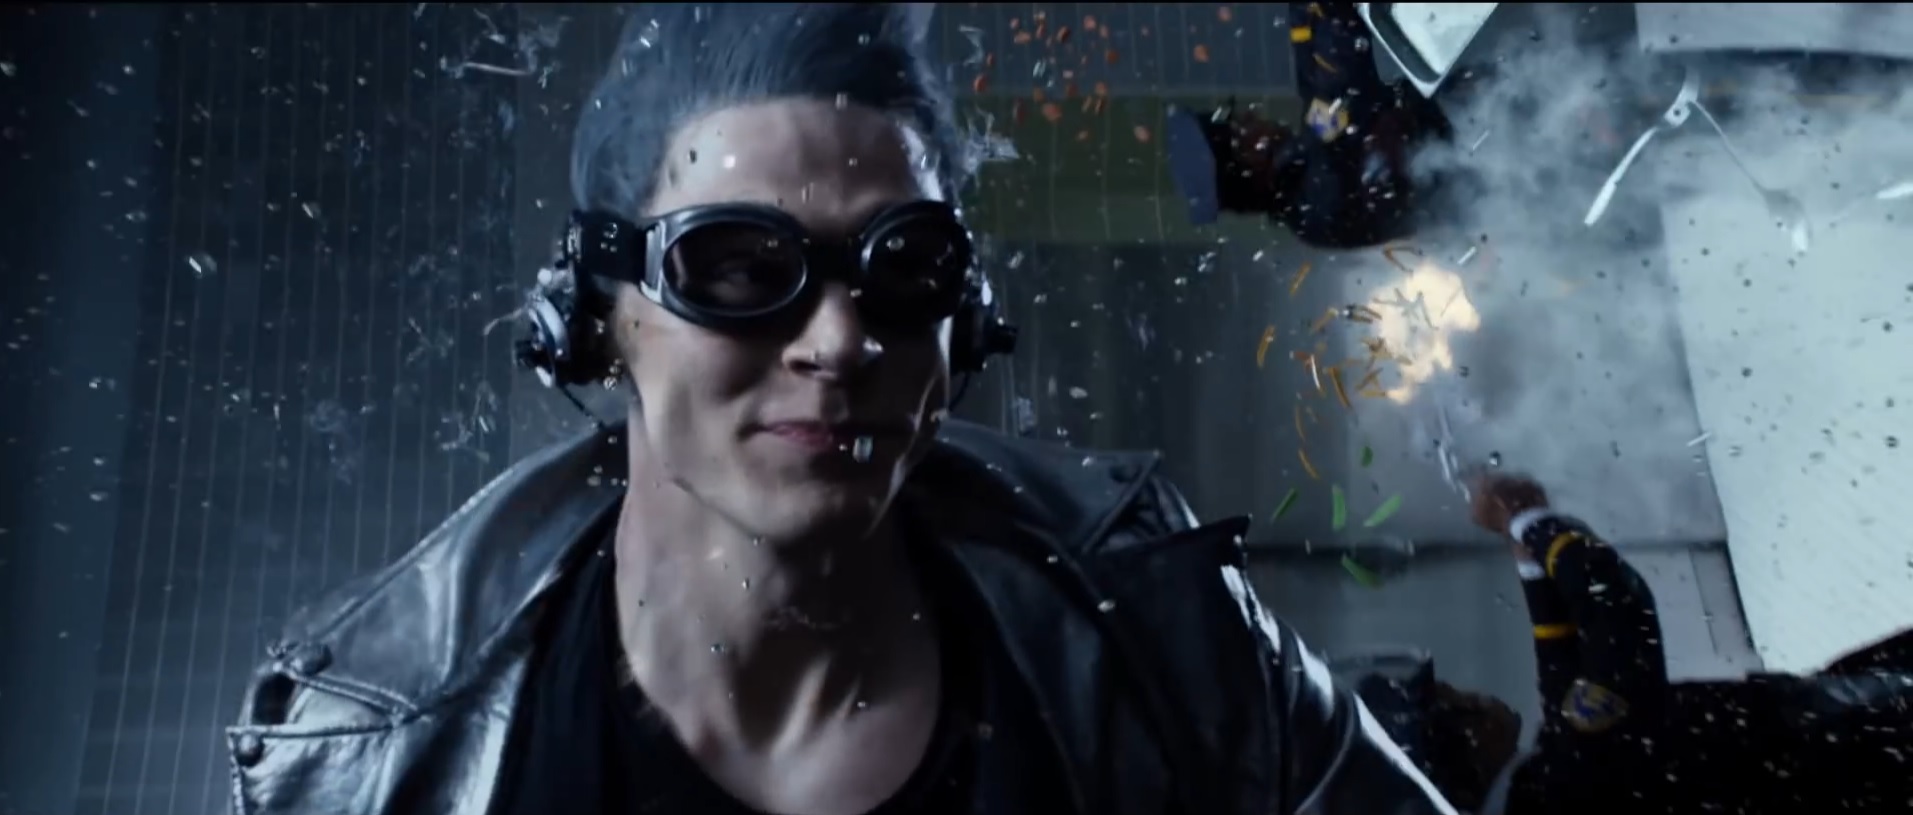 Geek insider, geekinsider, geekinsider. Com,, quicksilver: gone too soon? , entertainment